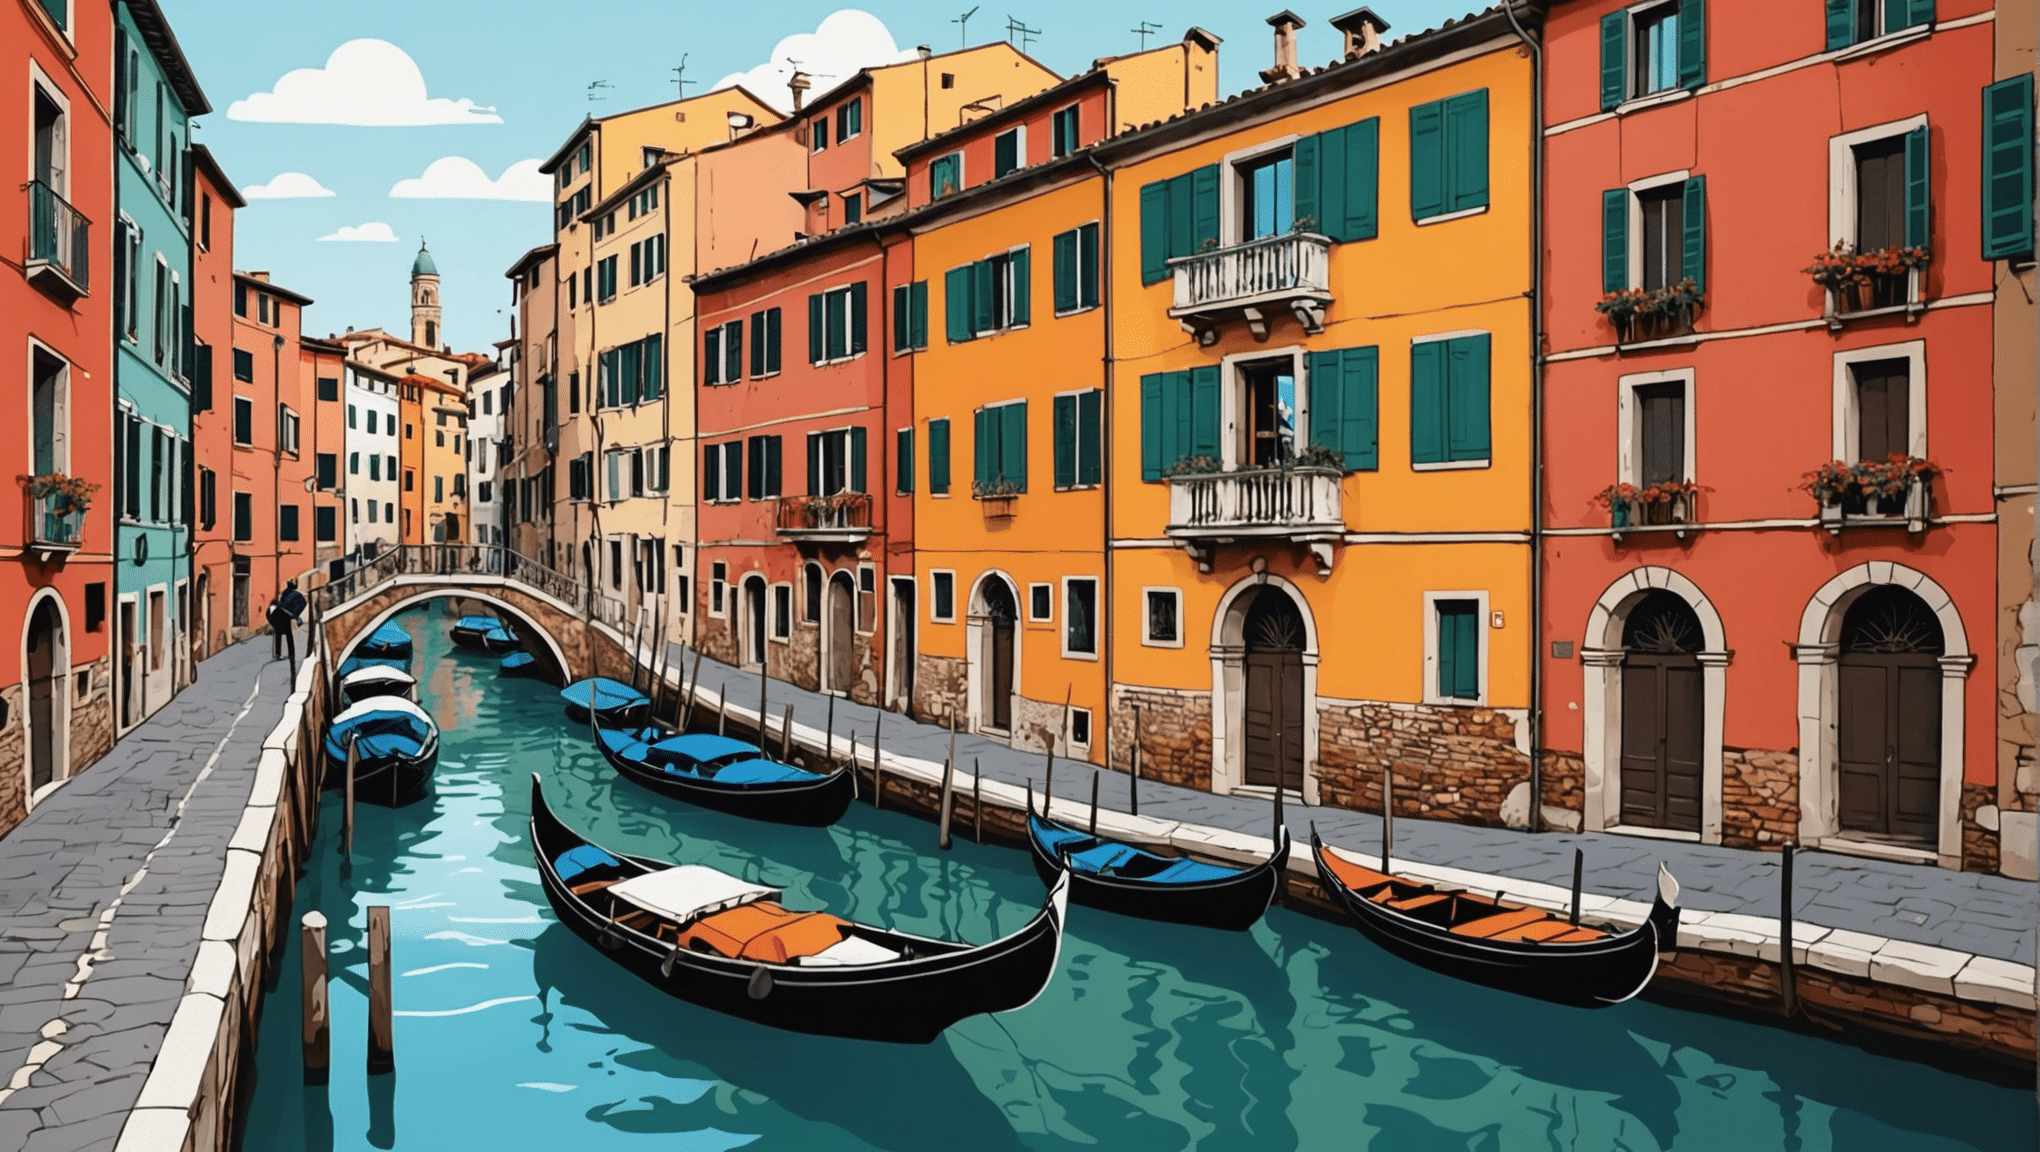 discover the must-sees for a trip to Italy: from artistic treasures to culinary delights, including breathtaking landscapes. book your stay now!